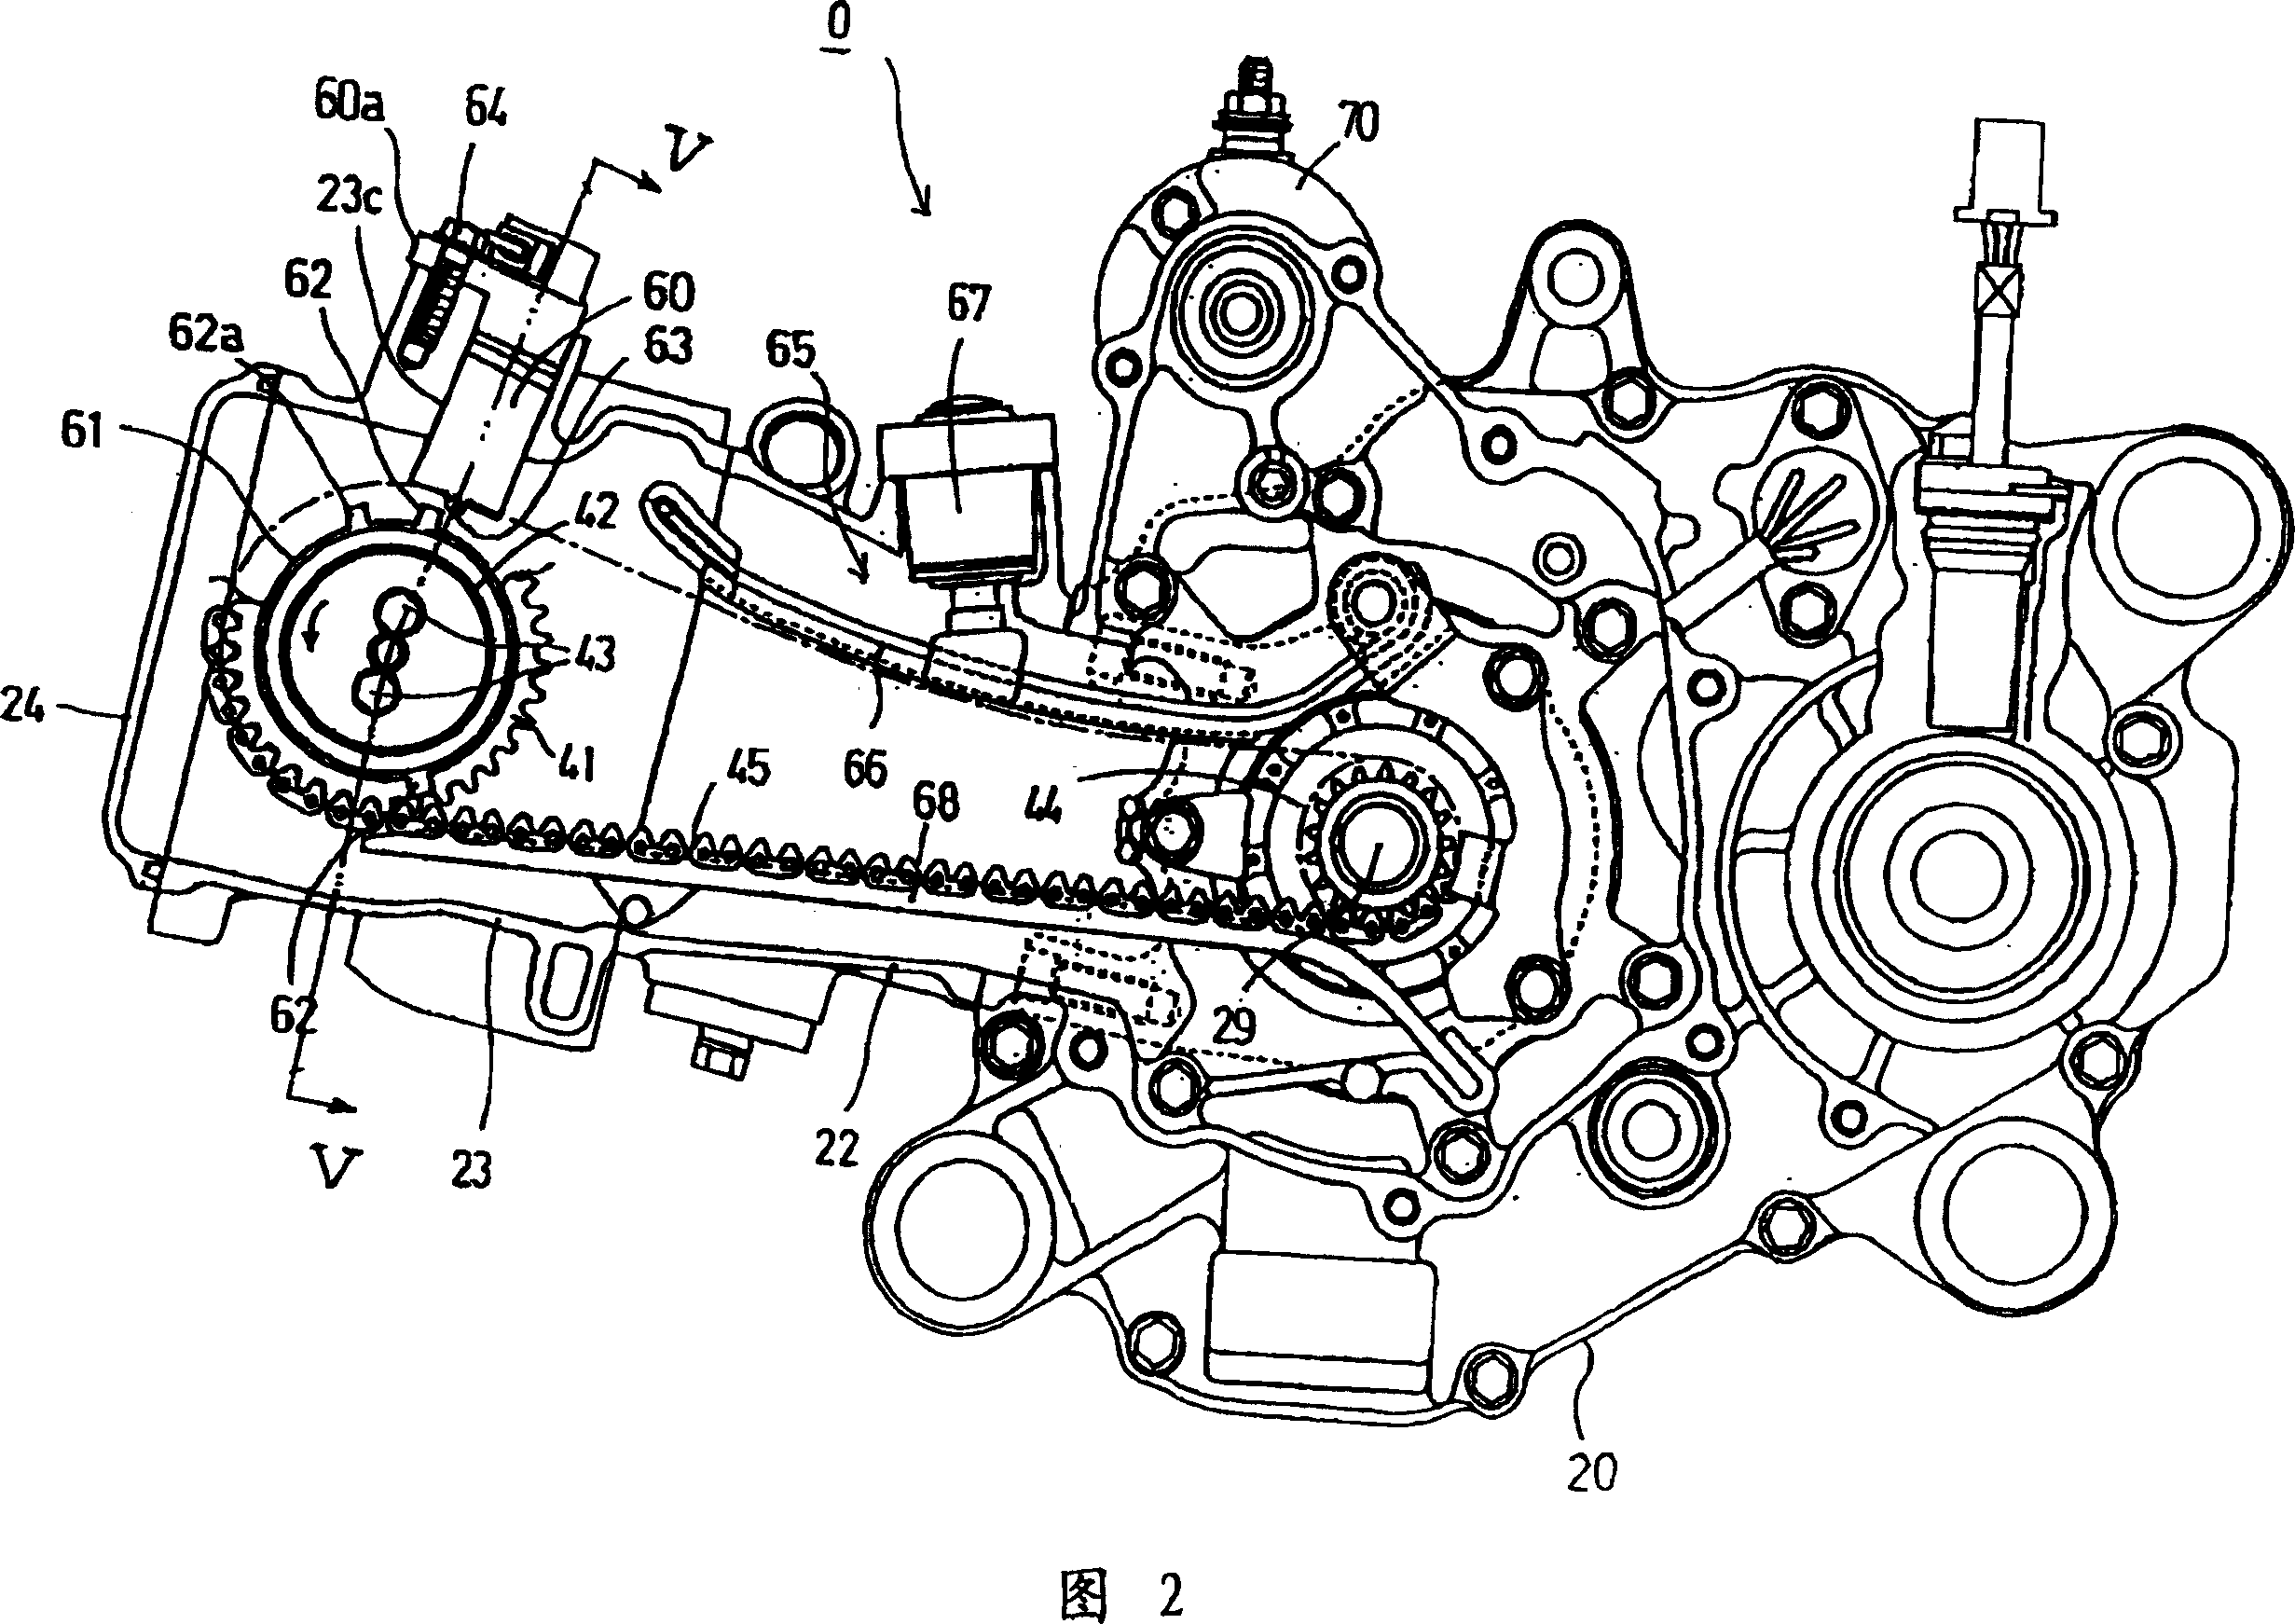 Cam shaft angle sensor mounting structure of IC engine